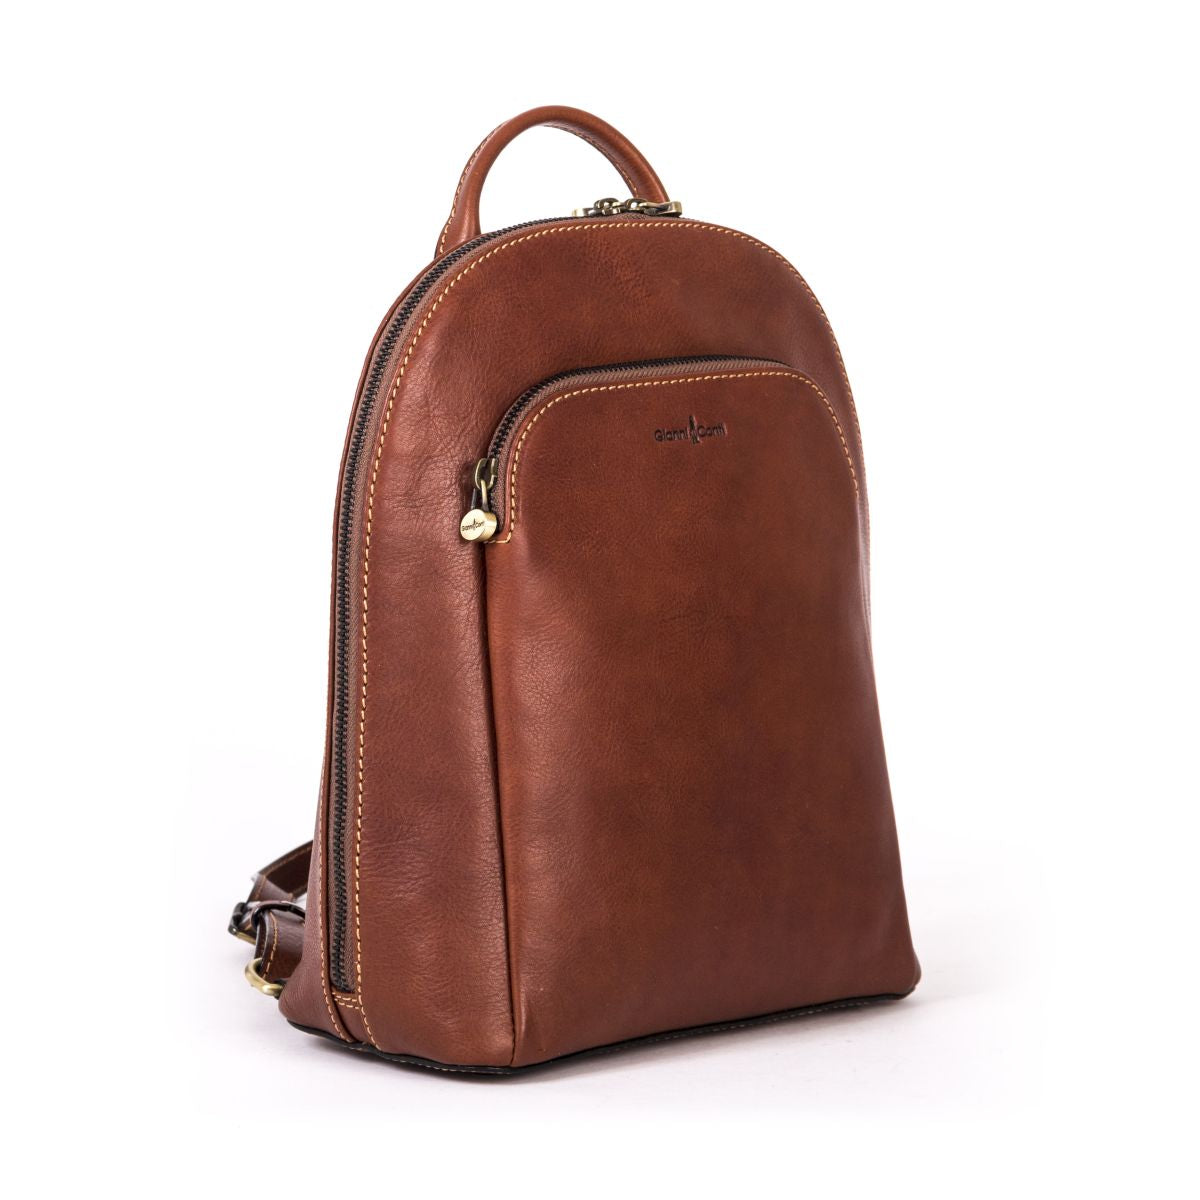 Gianni Conti Cognac Dino Leather Backpack